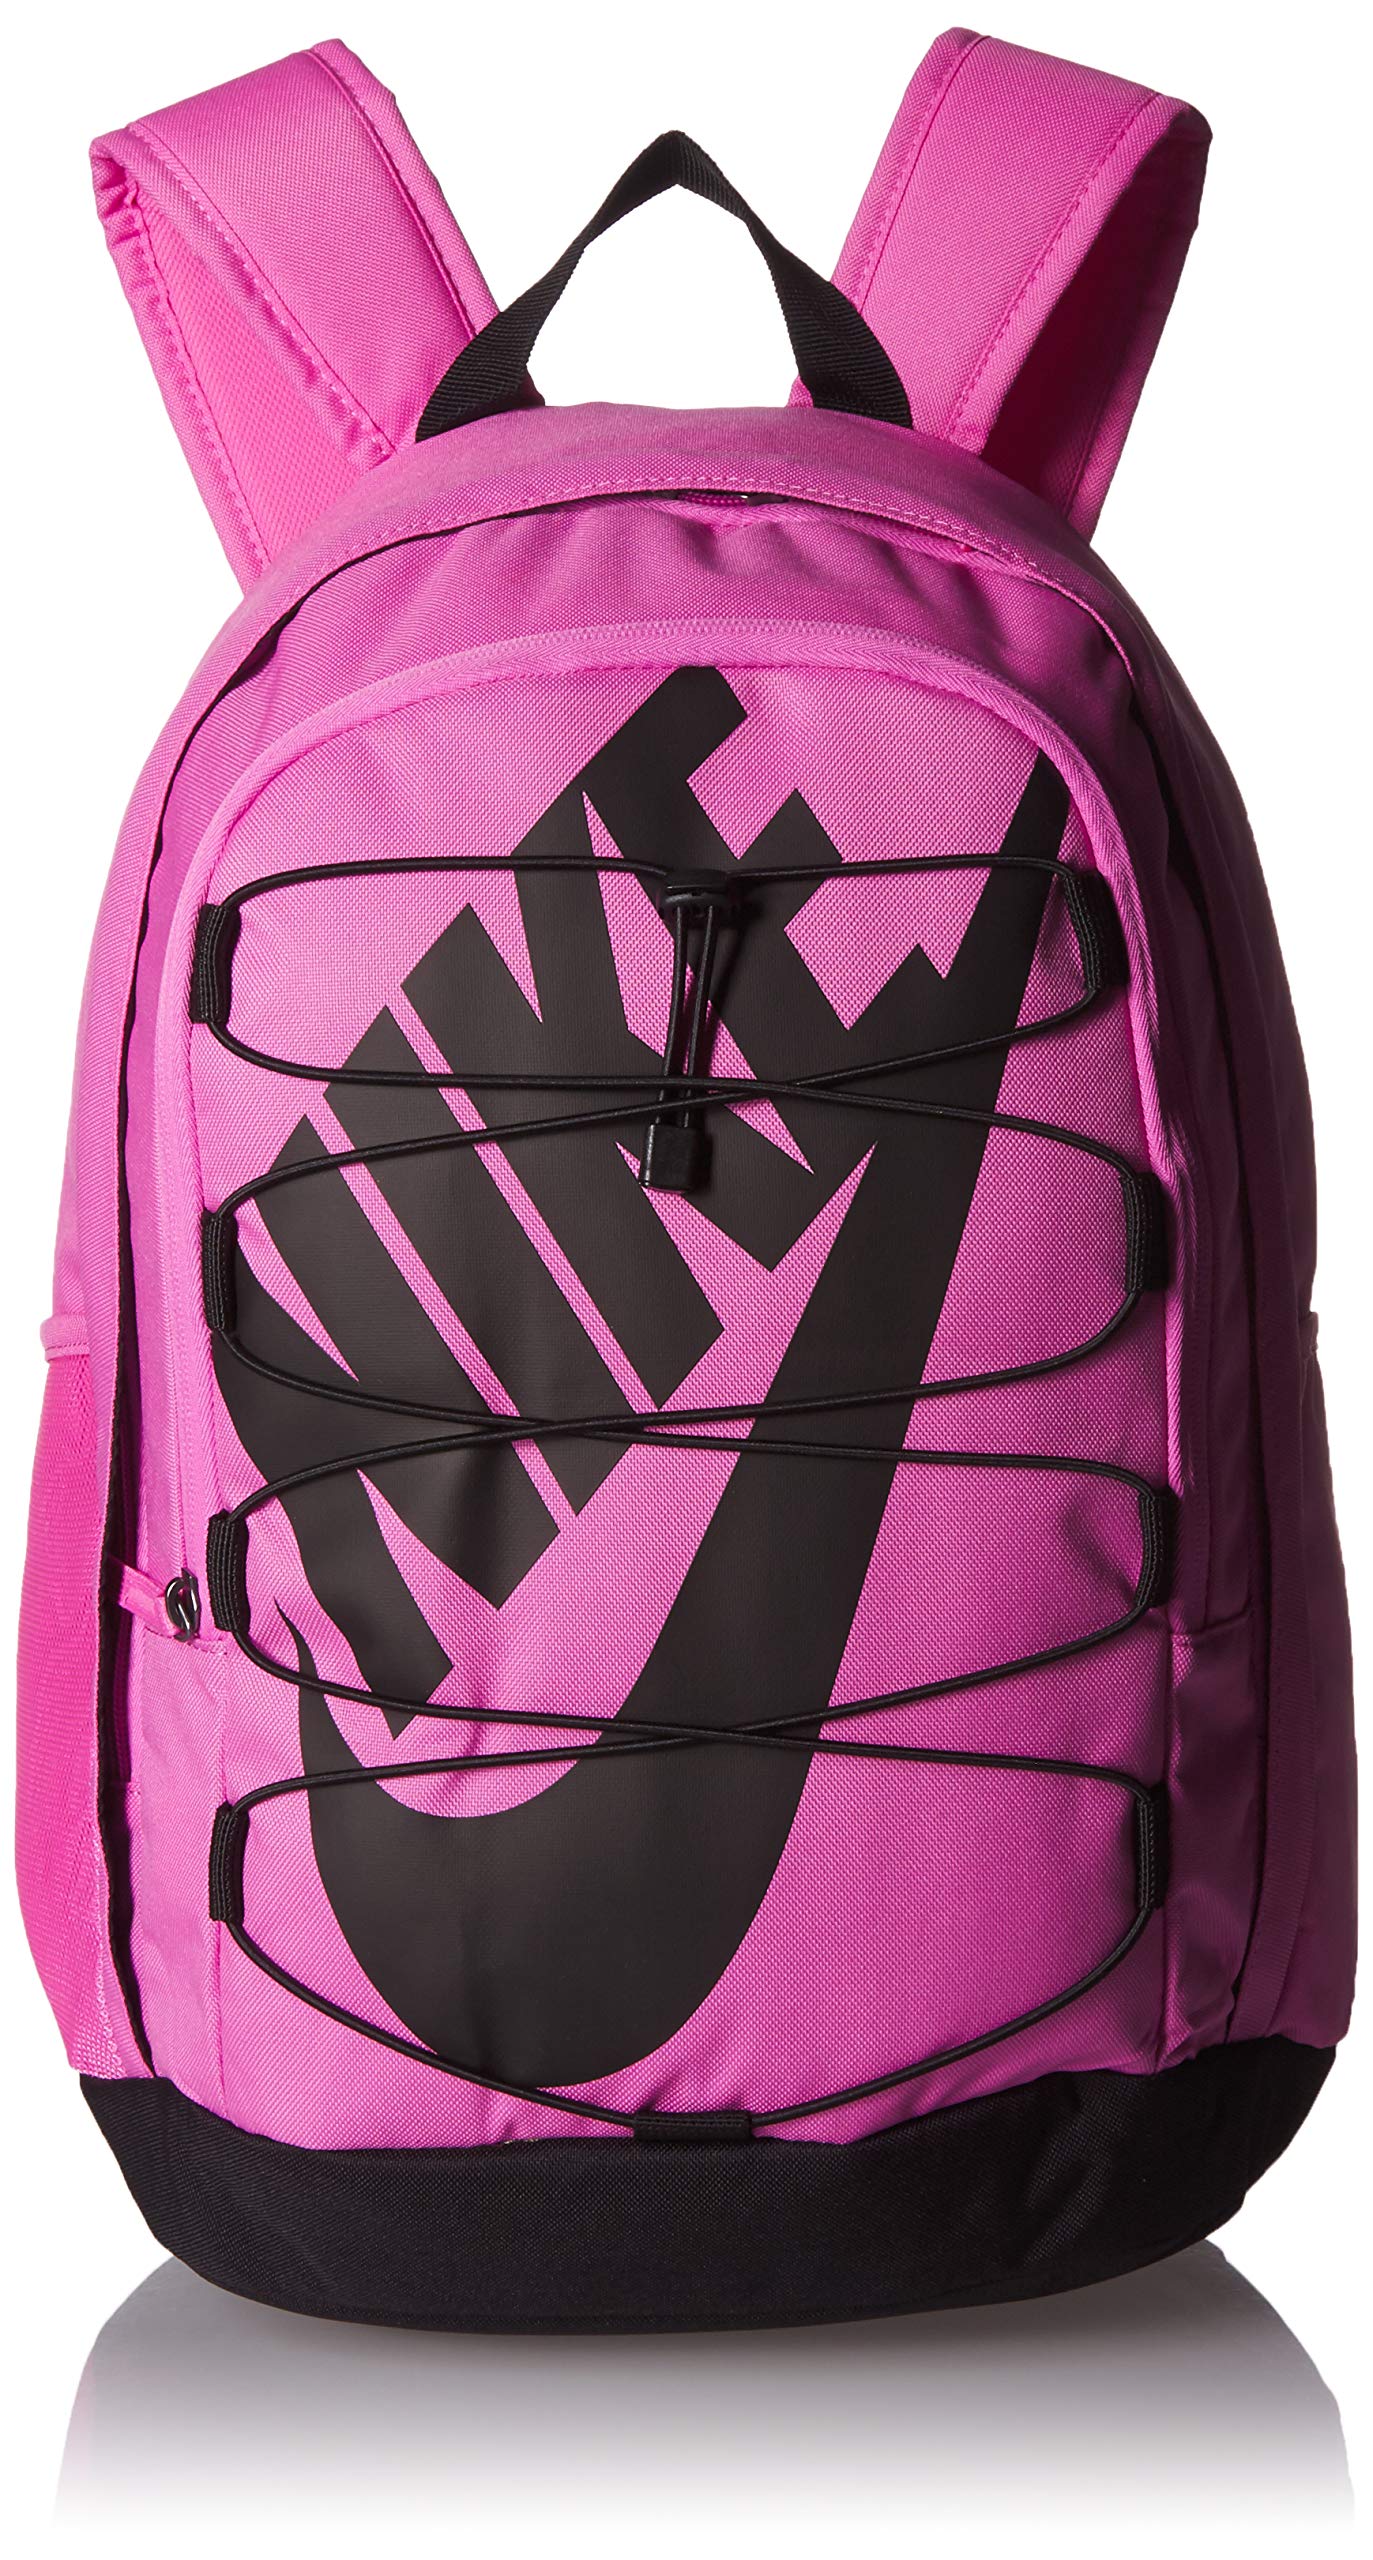 Nike 2.0 Backpack, for Women Men with Polyes– backpacks4less.com